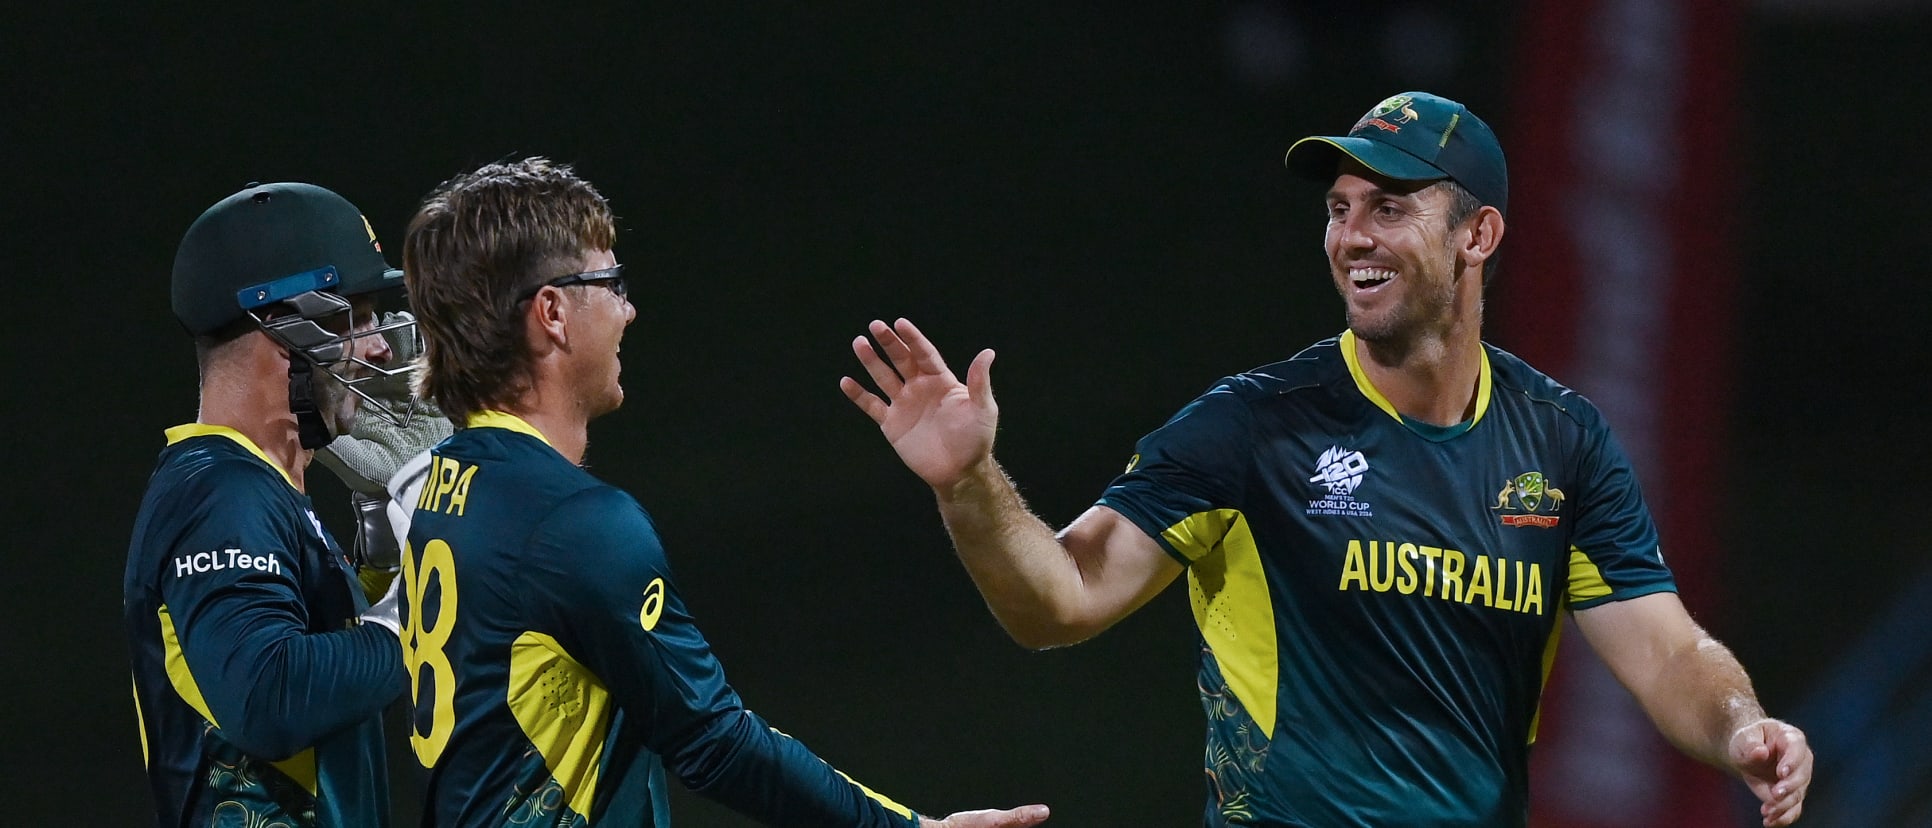 Australia secures Super Eight berth with 3rd consecutive win in ICC T20 World Cup